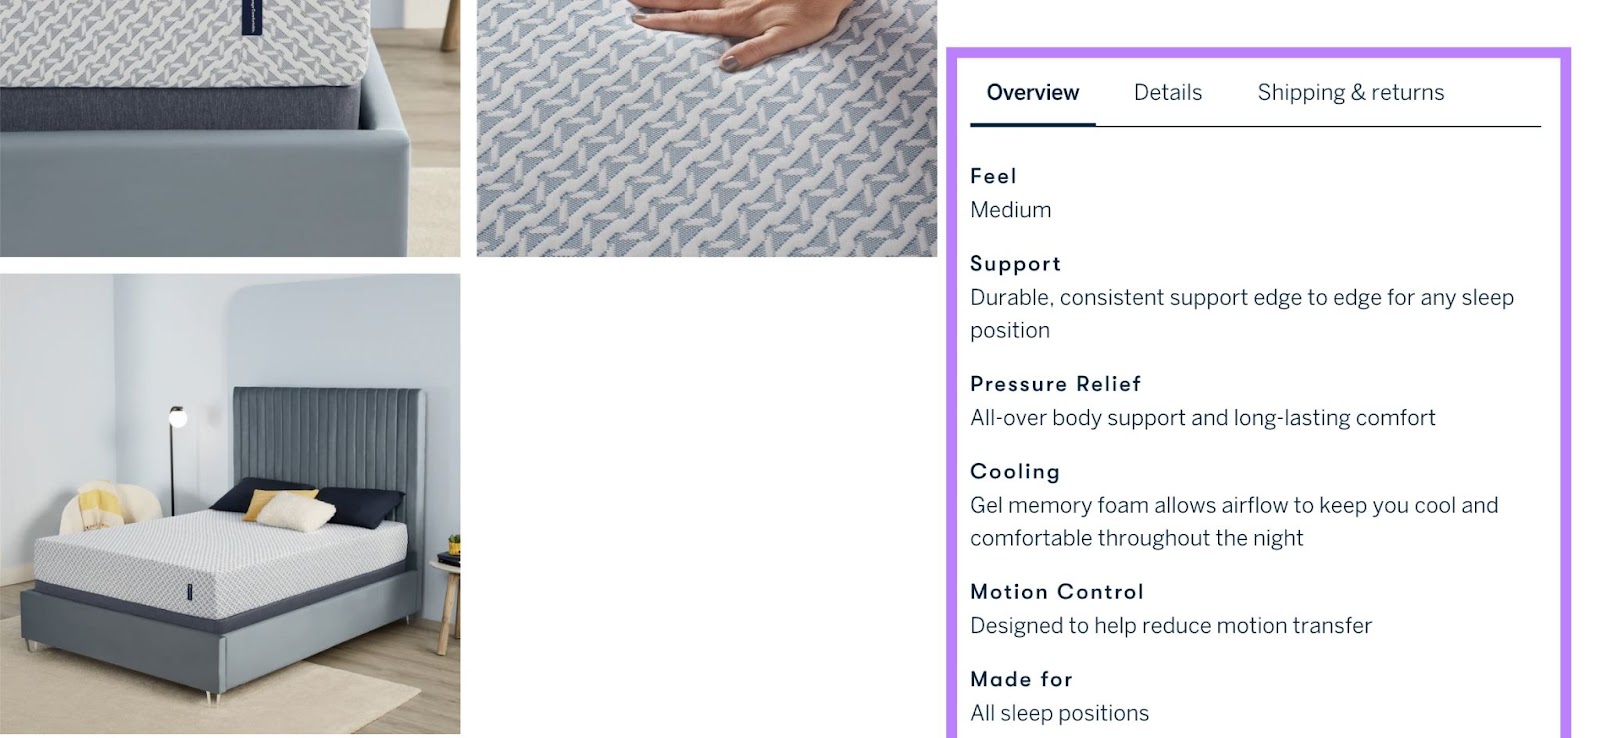 Serta's product page, showing detailed information about the mattress’s features and benefits